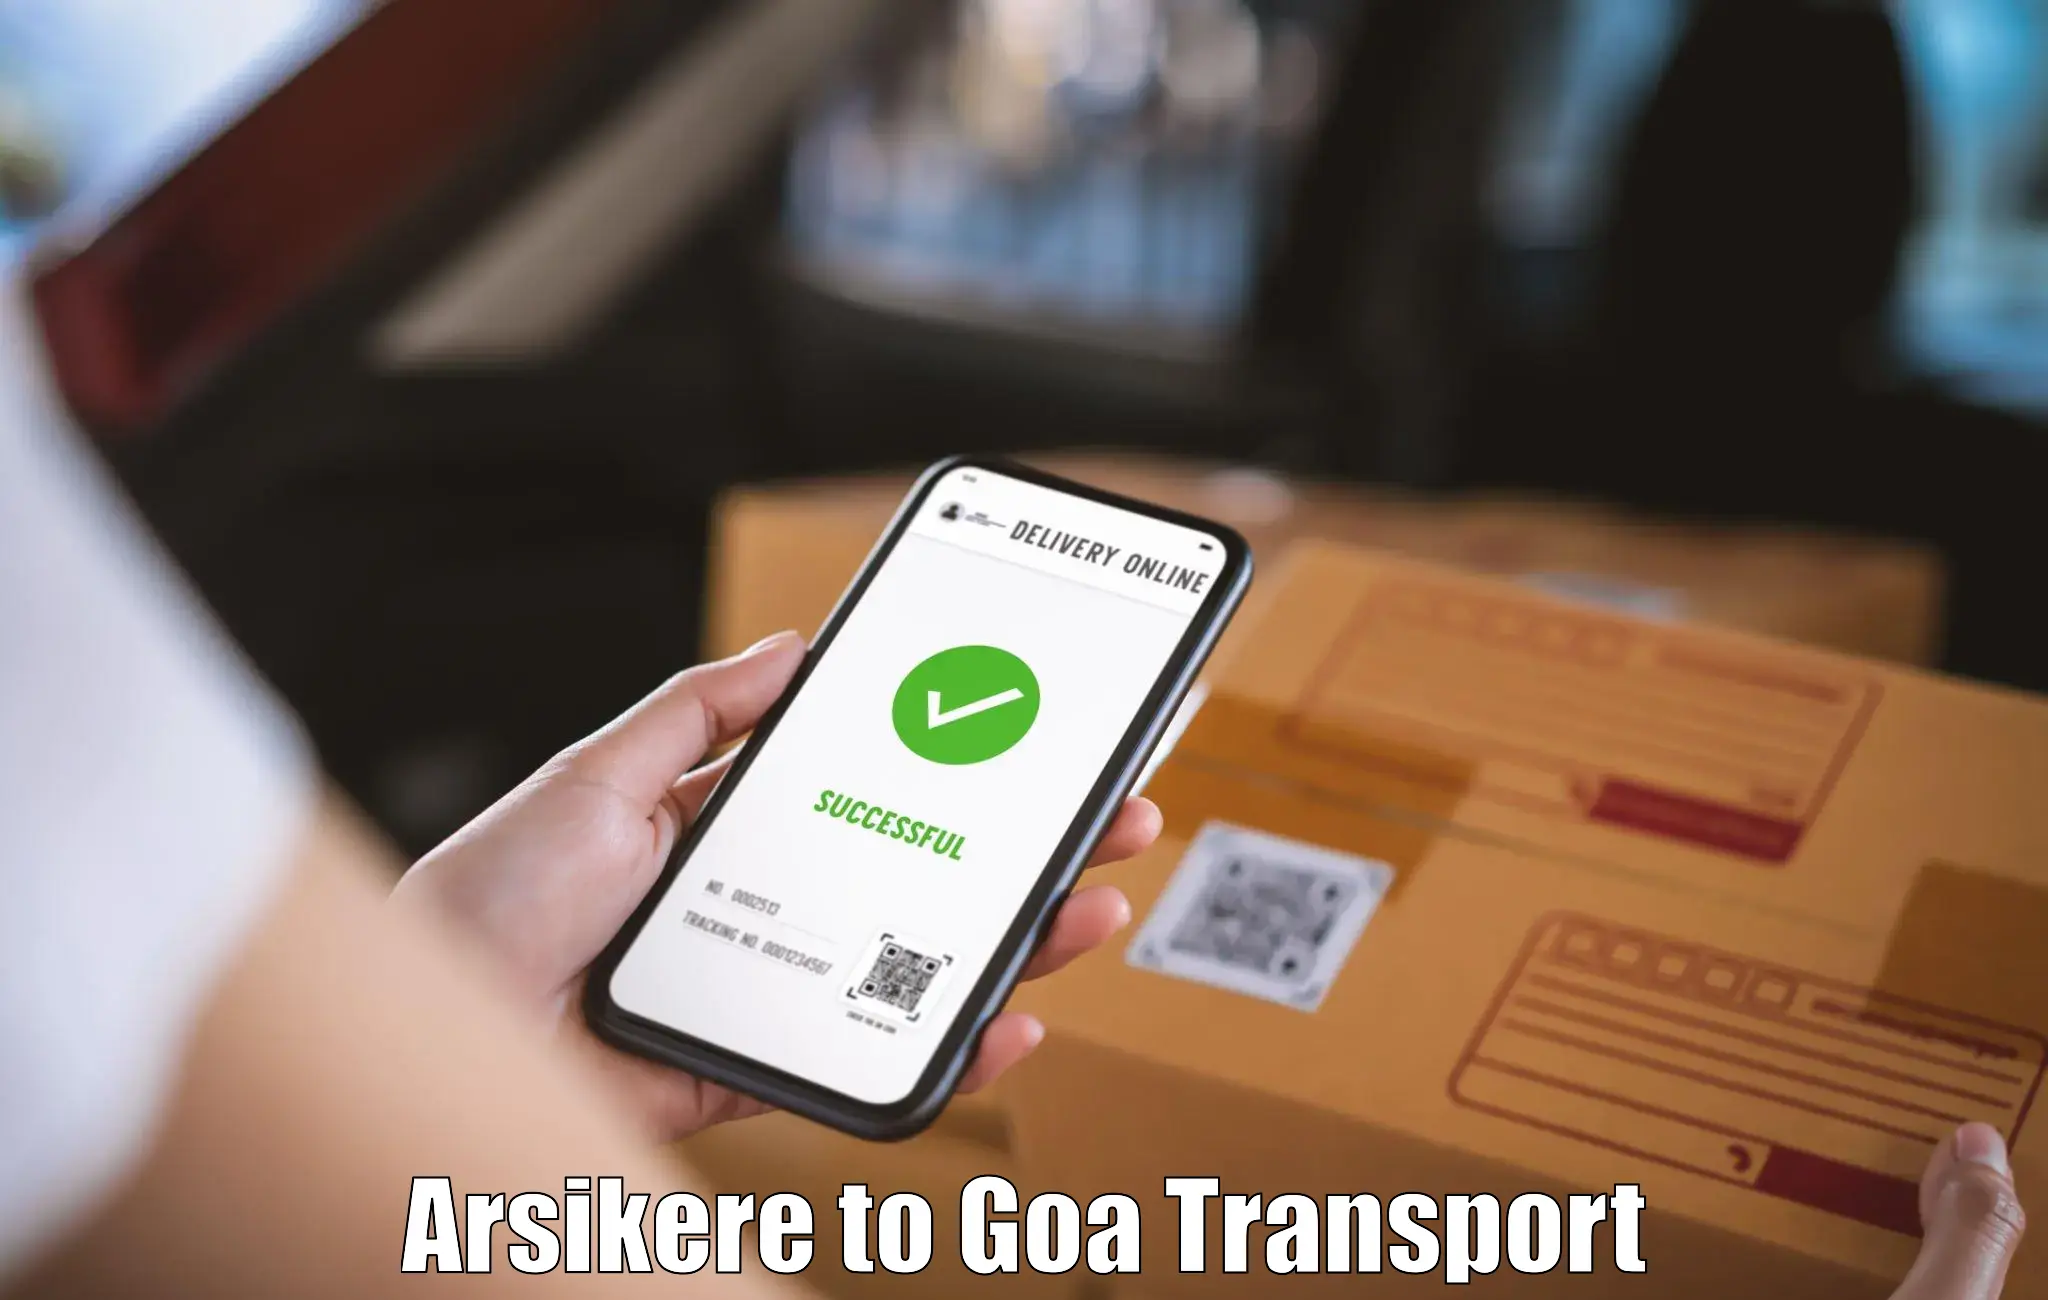 Air freight transport services Arsikere to Goa